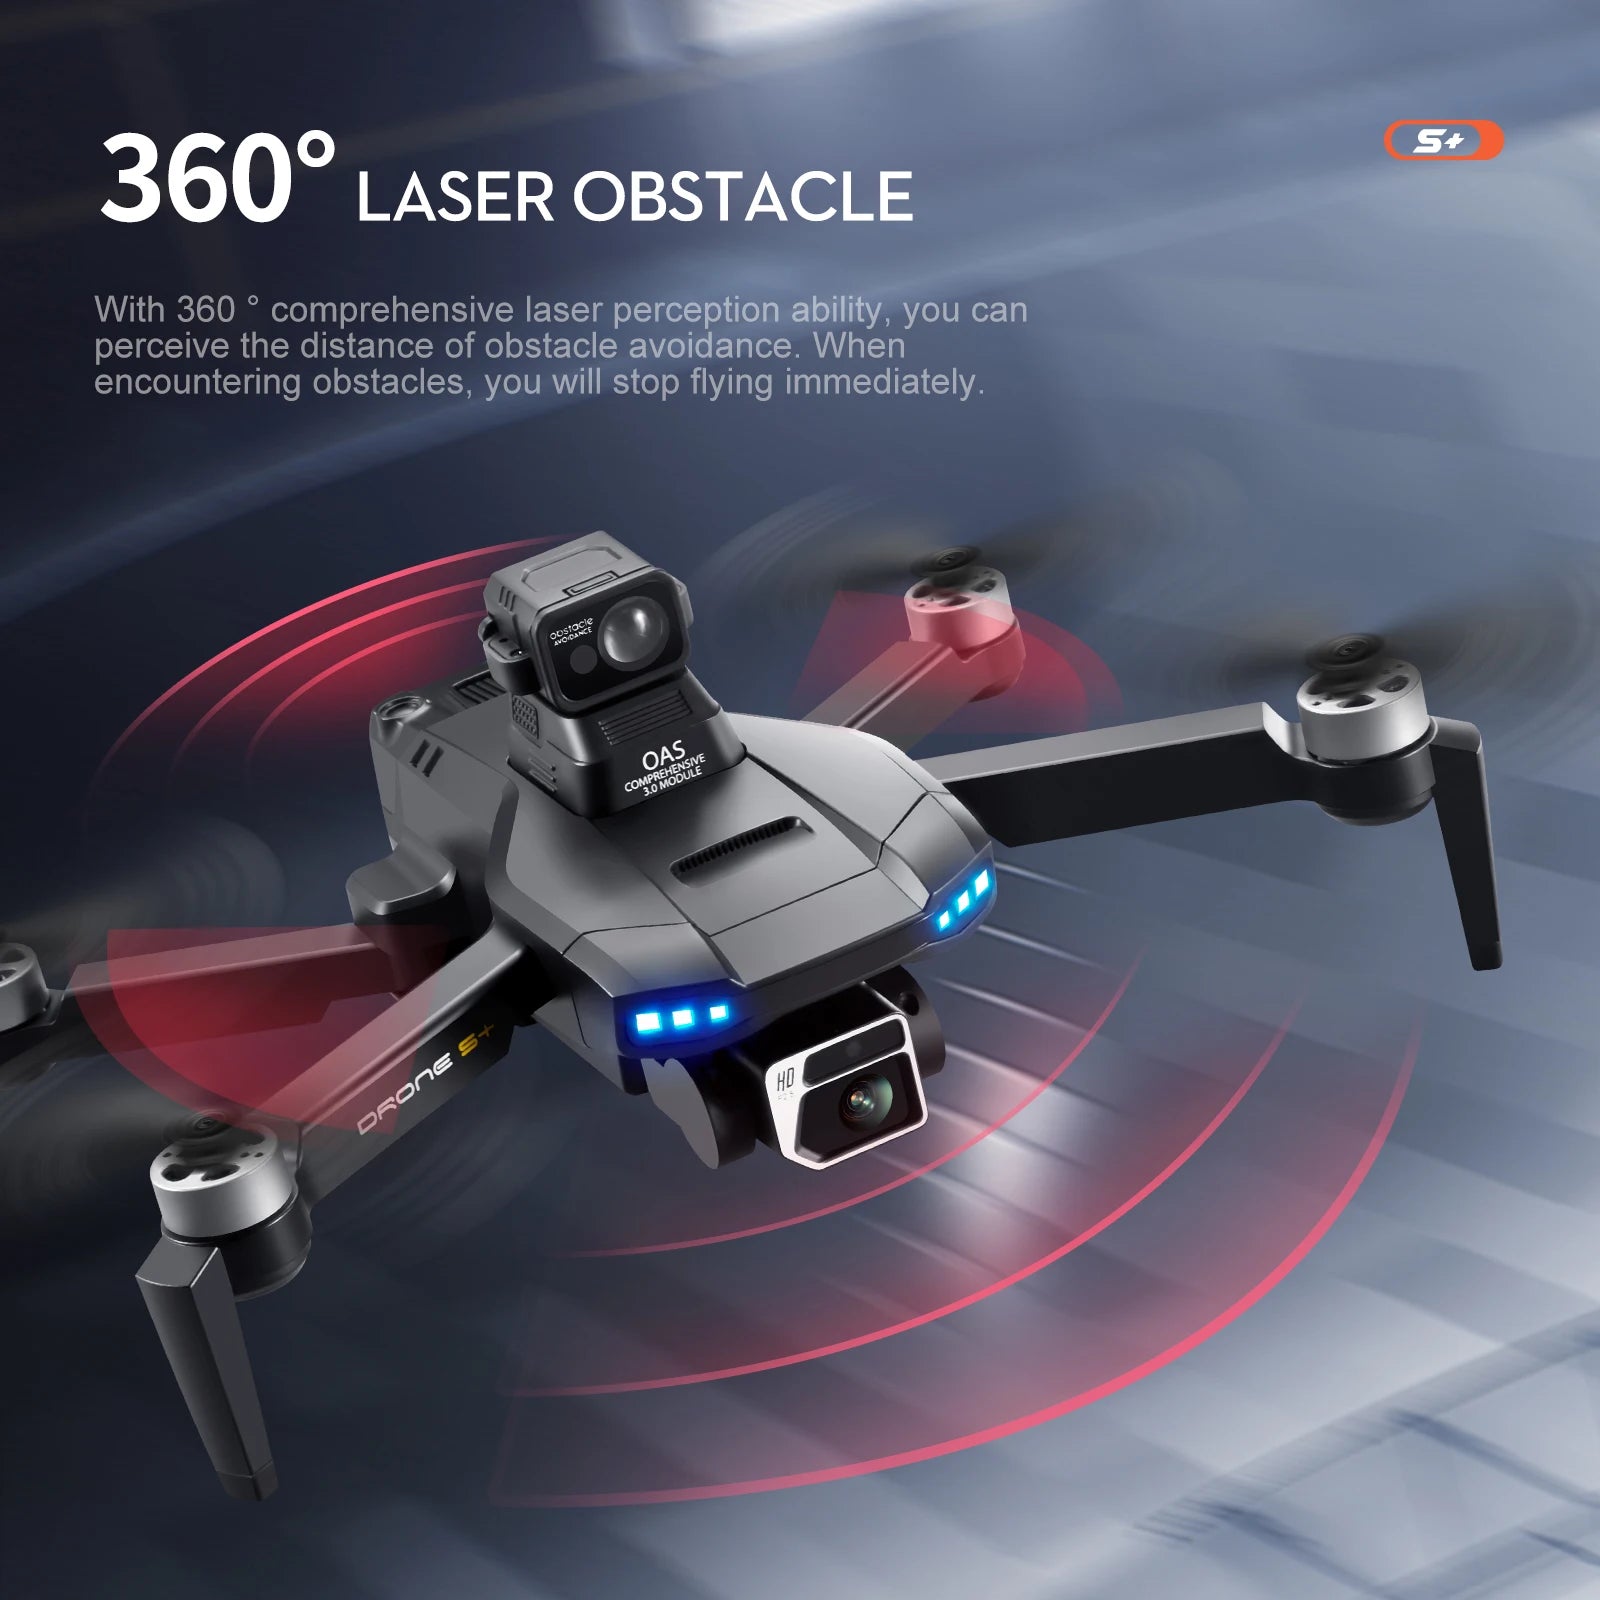 S+ Drone, 5+ 3608 LASER OBSTACLE With 360 comprehensive laser perception ability, you can